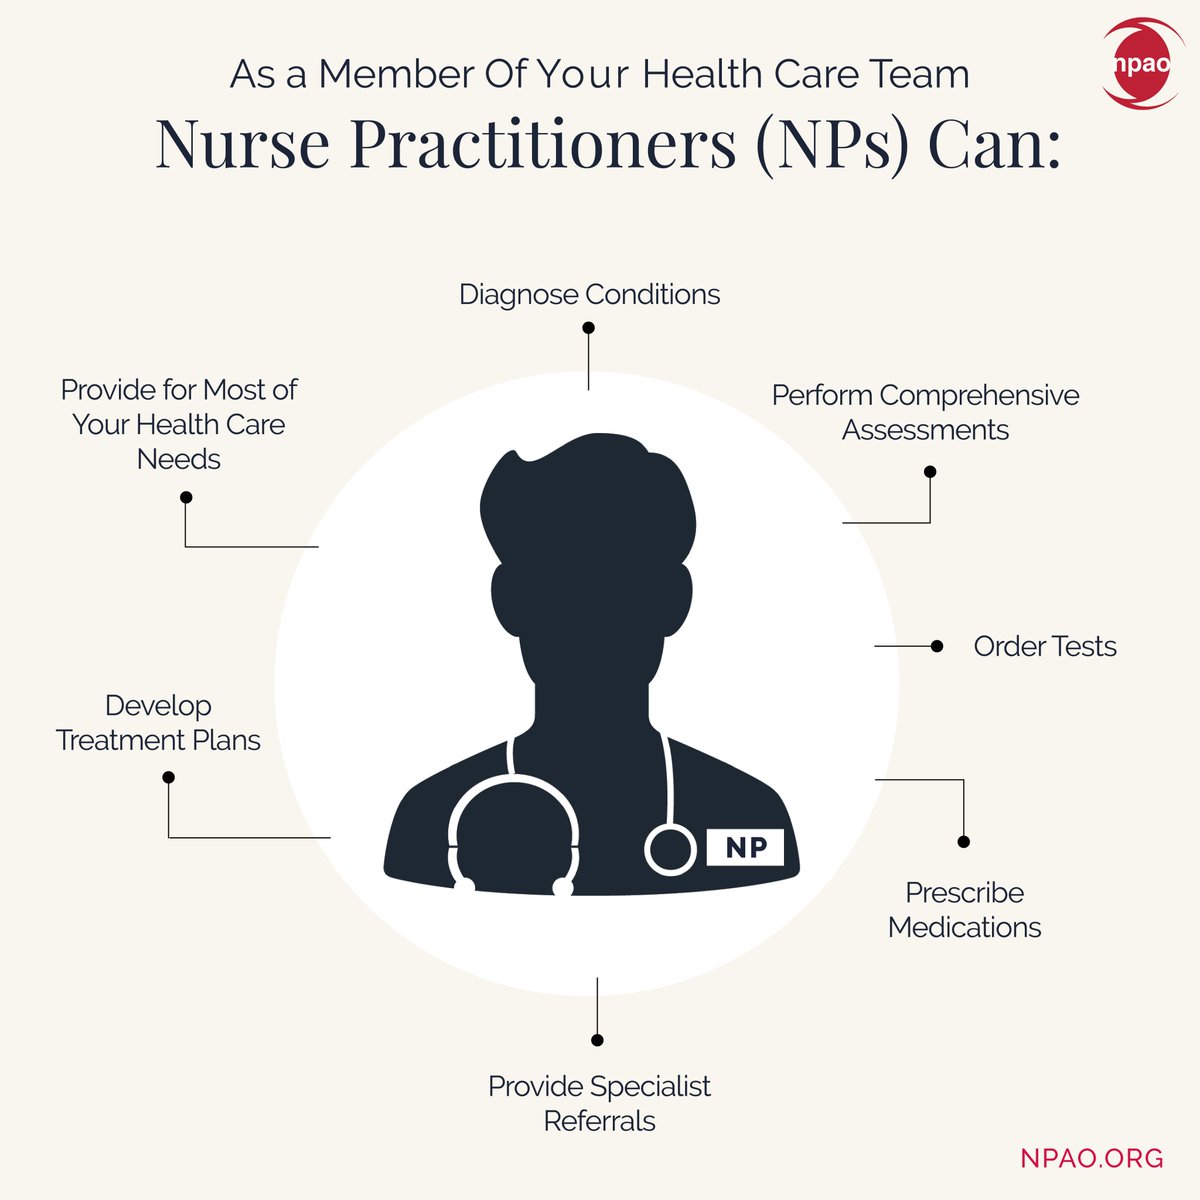 Nurse Practitioners can: Diagnose conditions, Perform Comprehensive Tests, Order Tests, Prescribe Medications, Provide Specialist Referrals, Develop Treatment Plans, Provide for Most of Your Health Care Needs Learn more about the NP scope of practice at npao.org